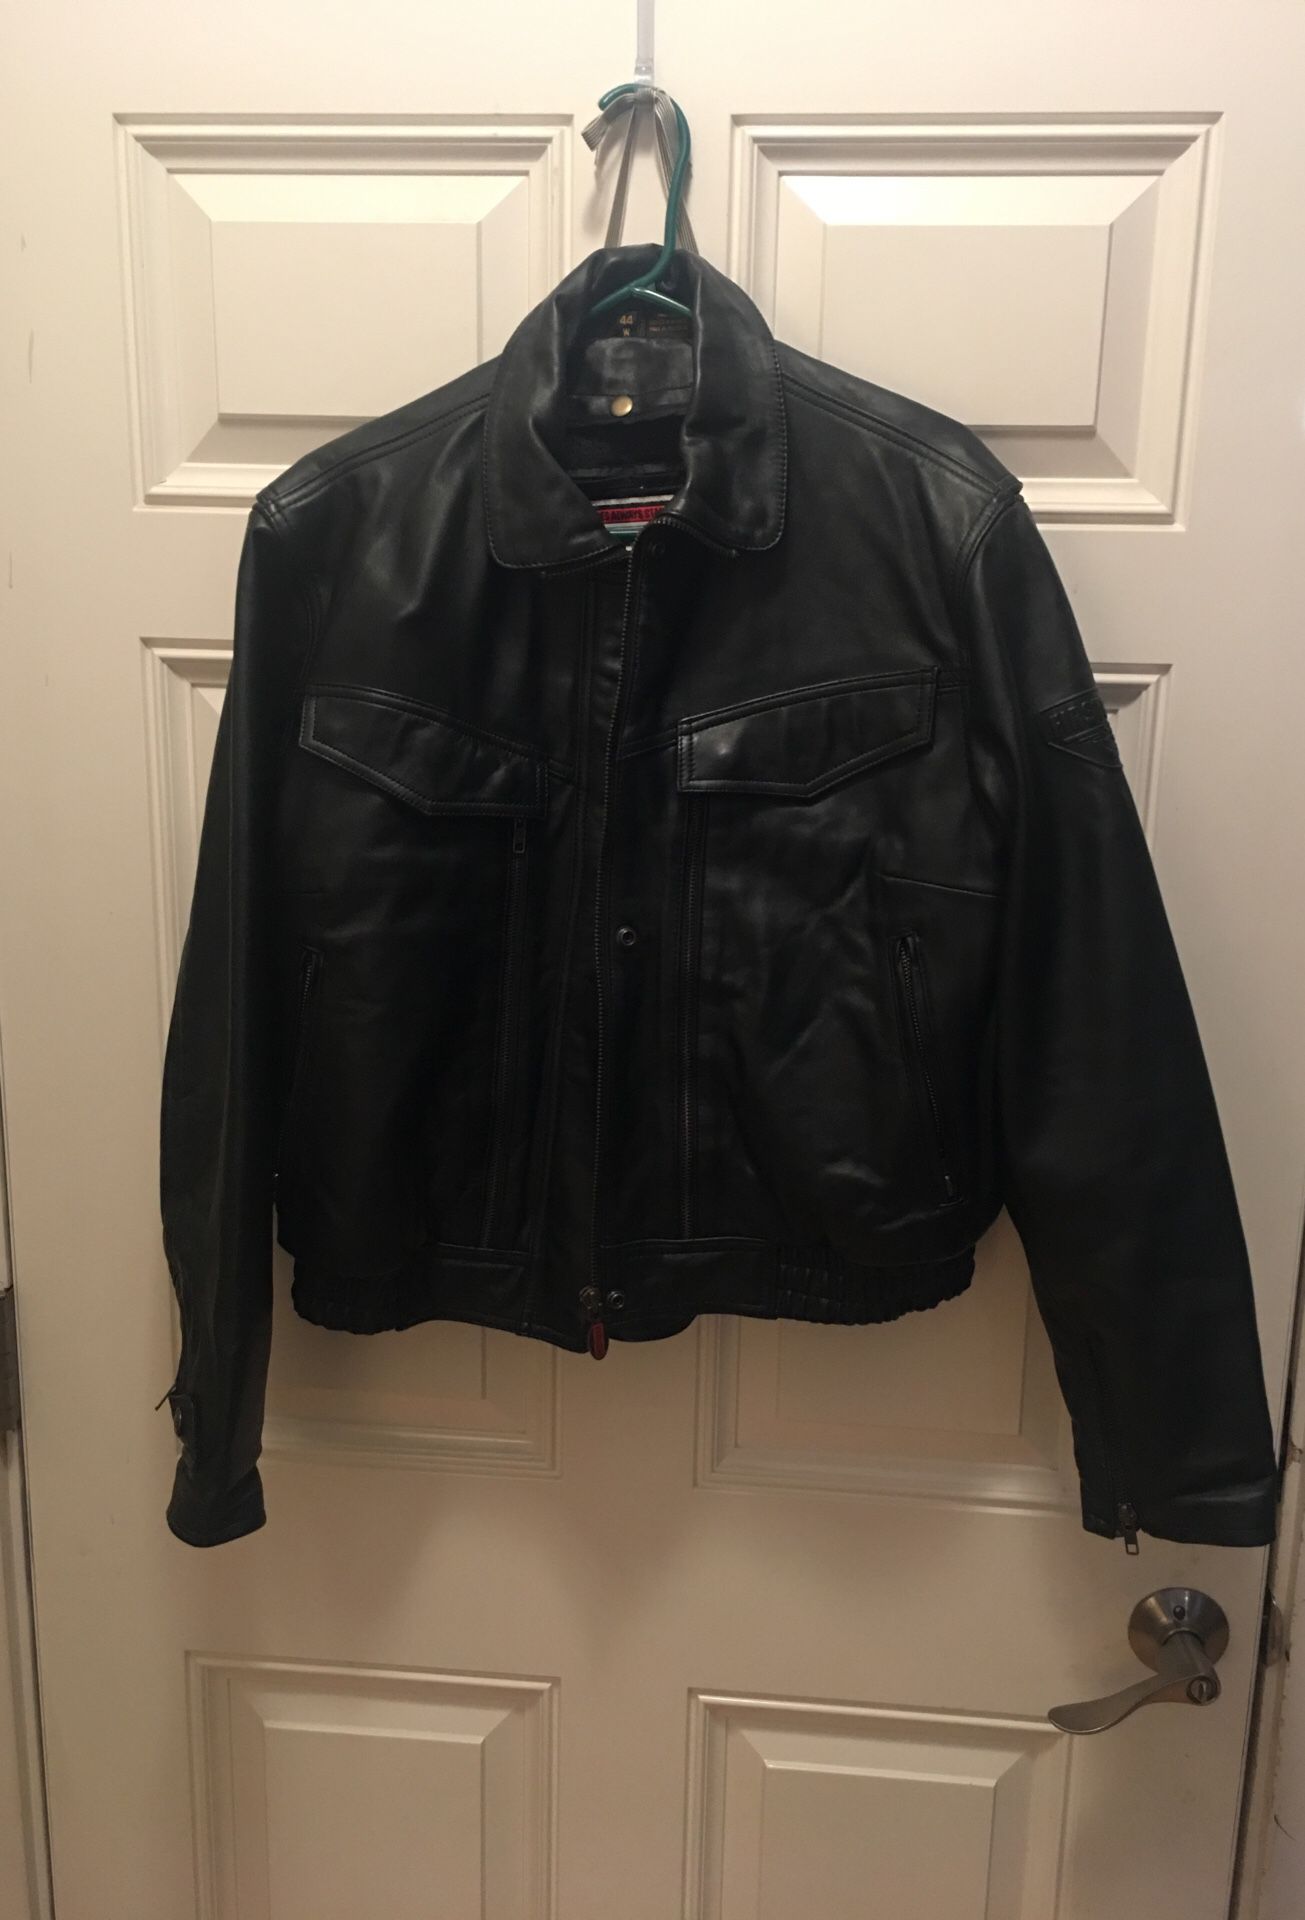 Lady’s motorcycle first gear leather jacket